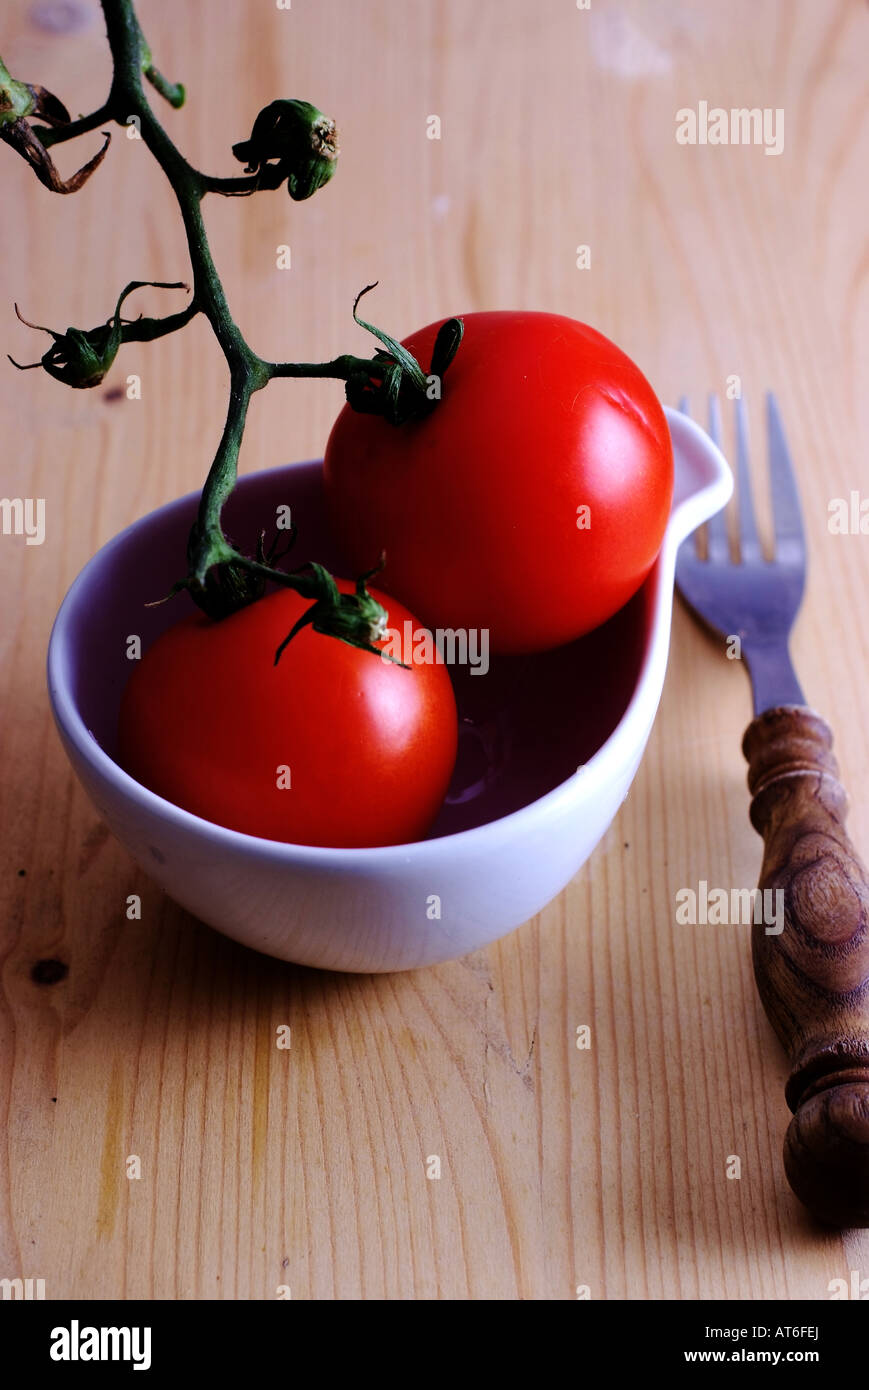 Red tomatoes in a cup Stock Photo